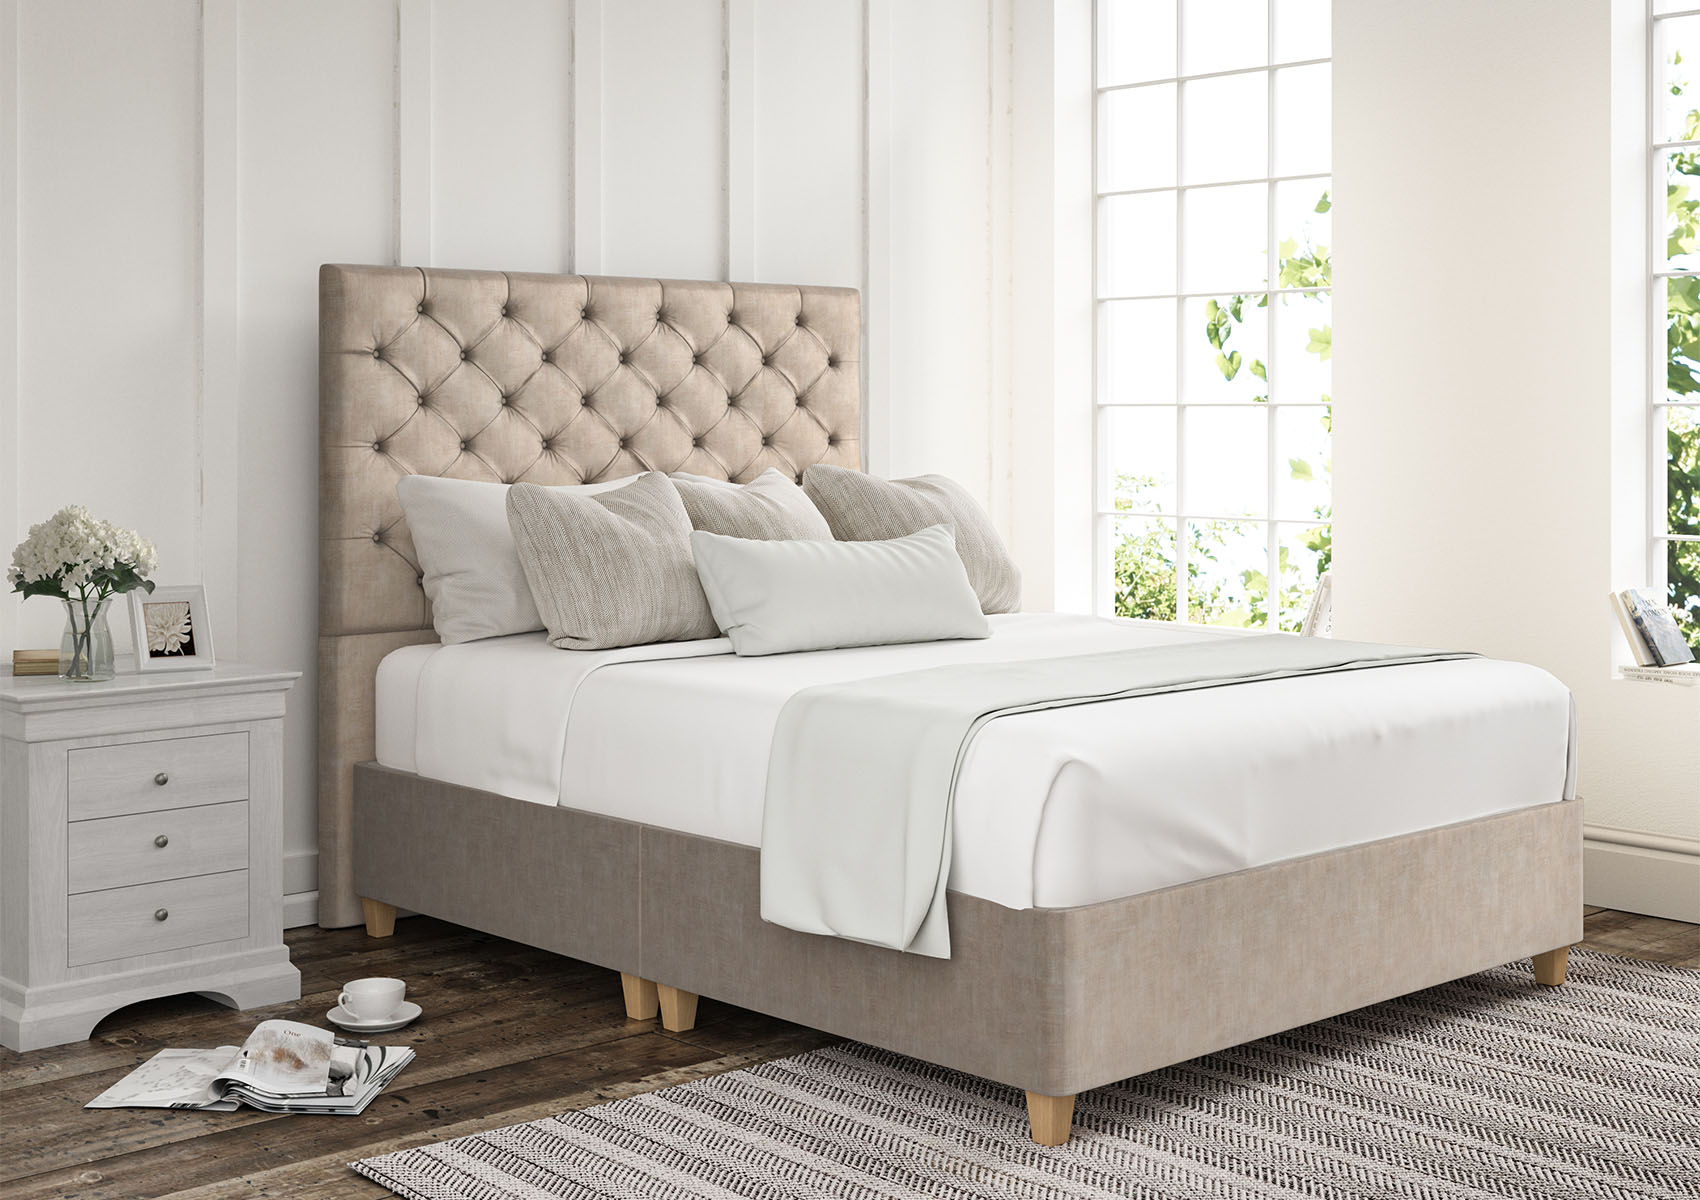 View Chesterfield Carina Parchment Upholstered King Size Divan Bed Time4Sleep information